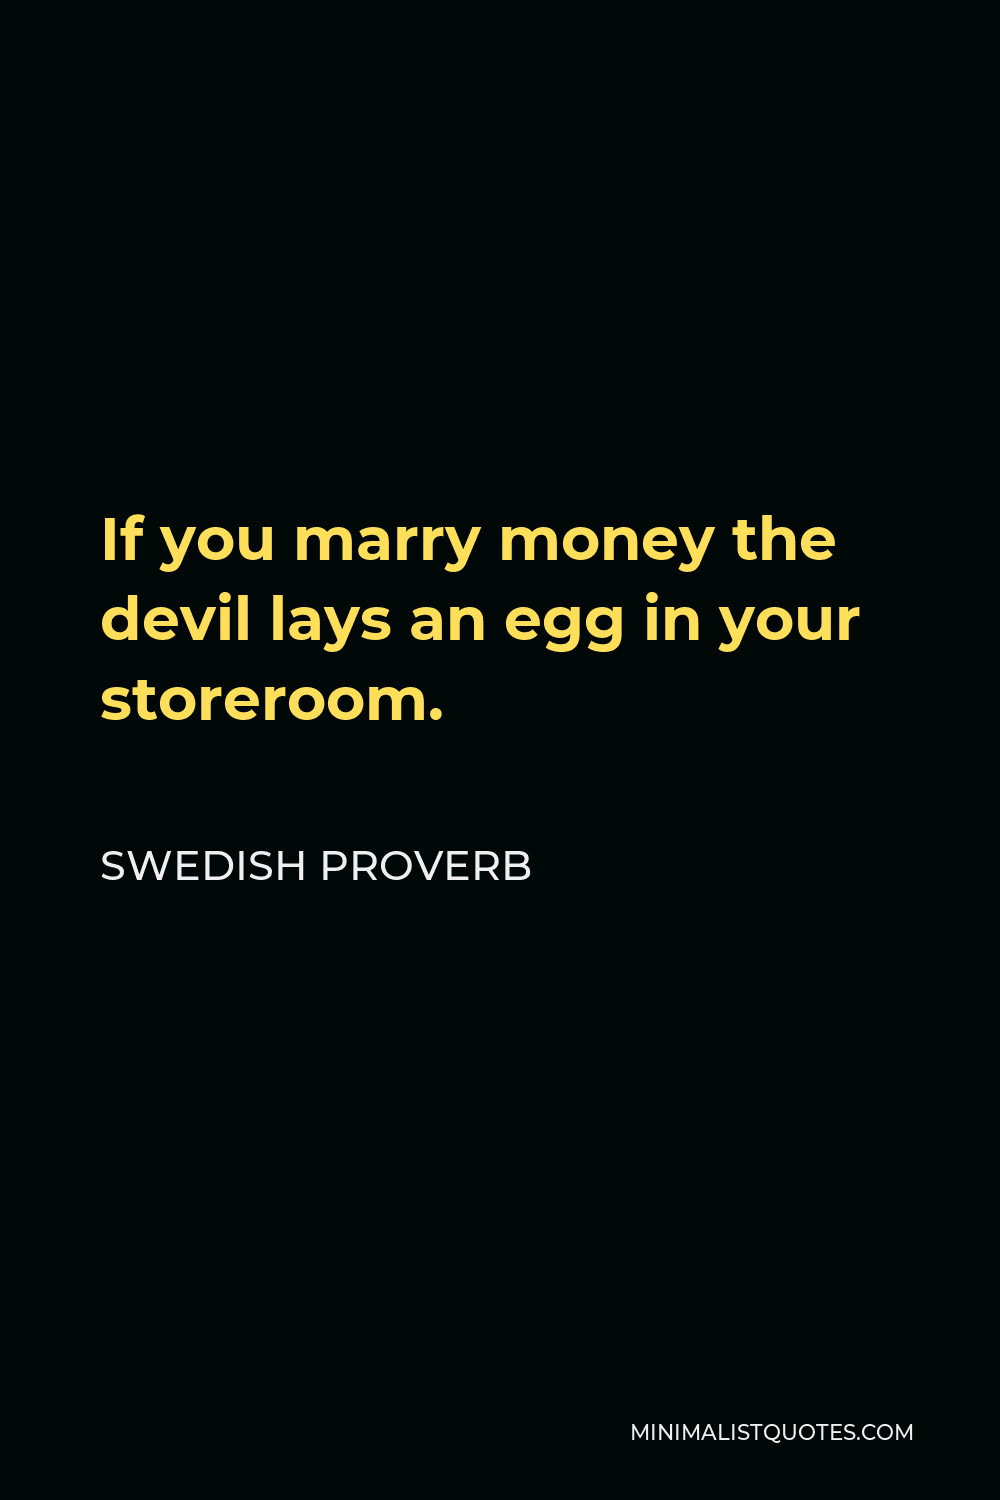 Swedish Proverb Quote - If you marry money the devil lays an egg in your storeroom.